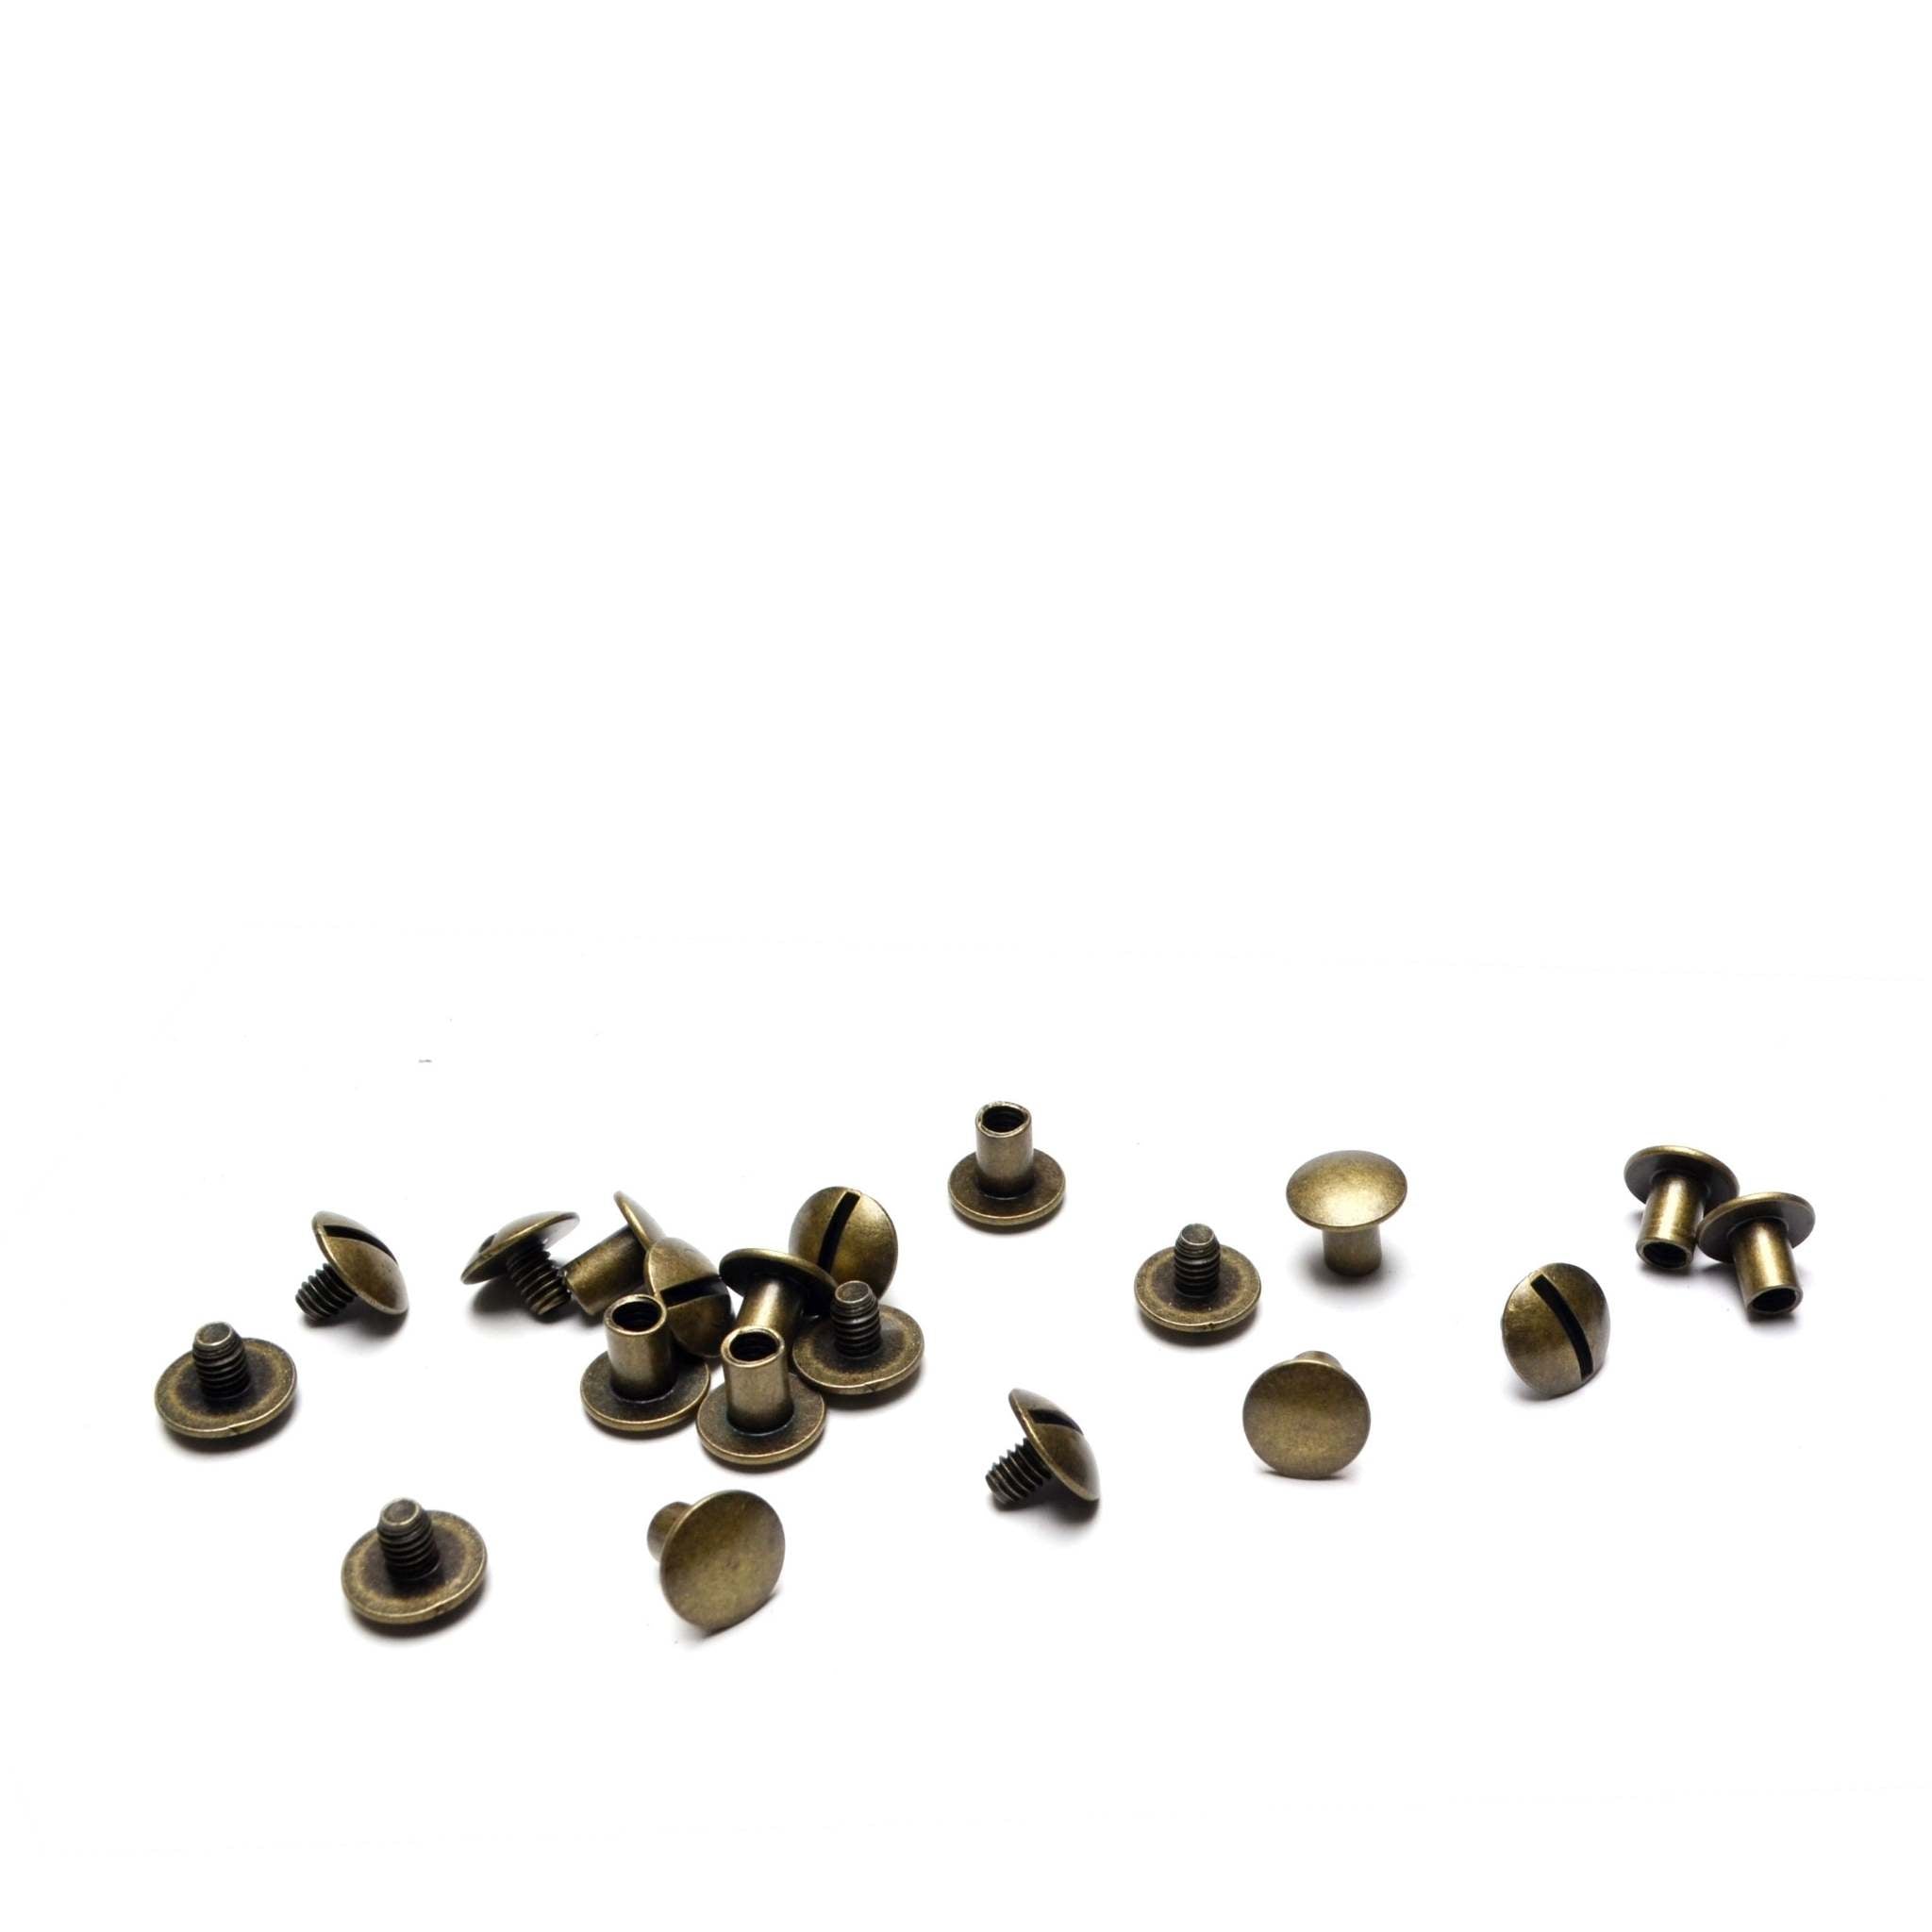 Closed Back Screwposts (Chicago Screws) 6mm (1/4") Antique Brass from Identity Leathercraft